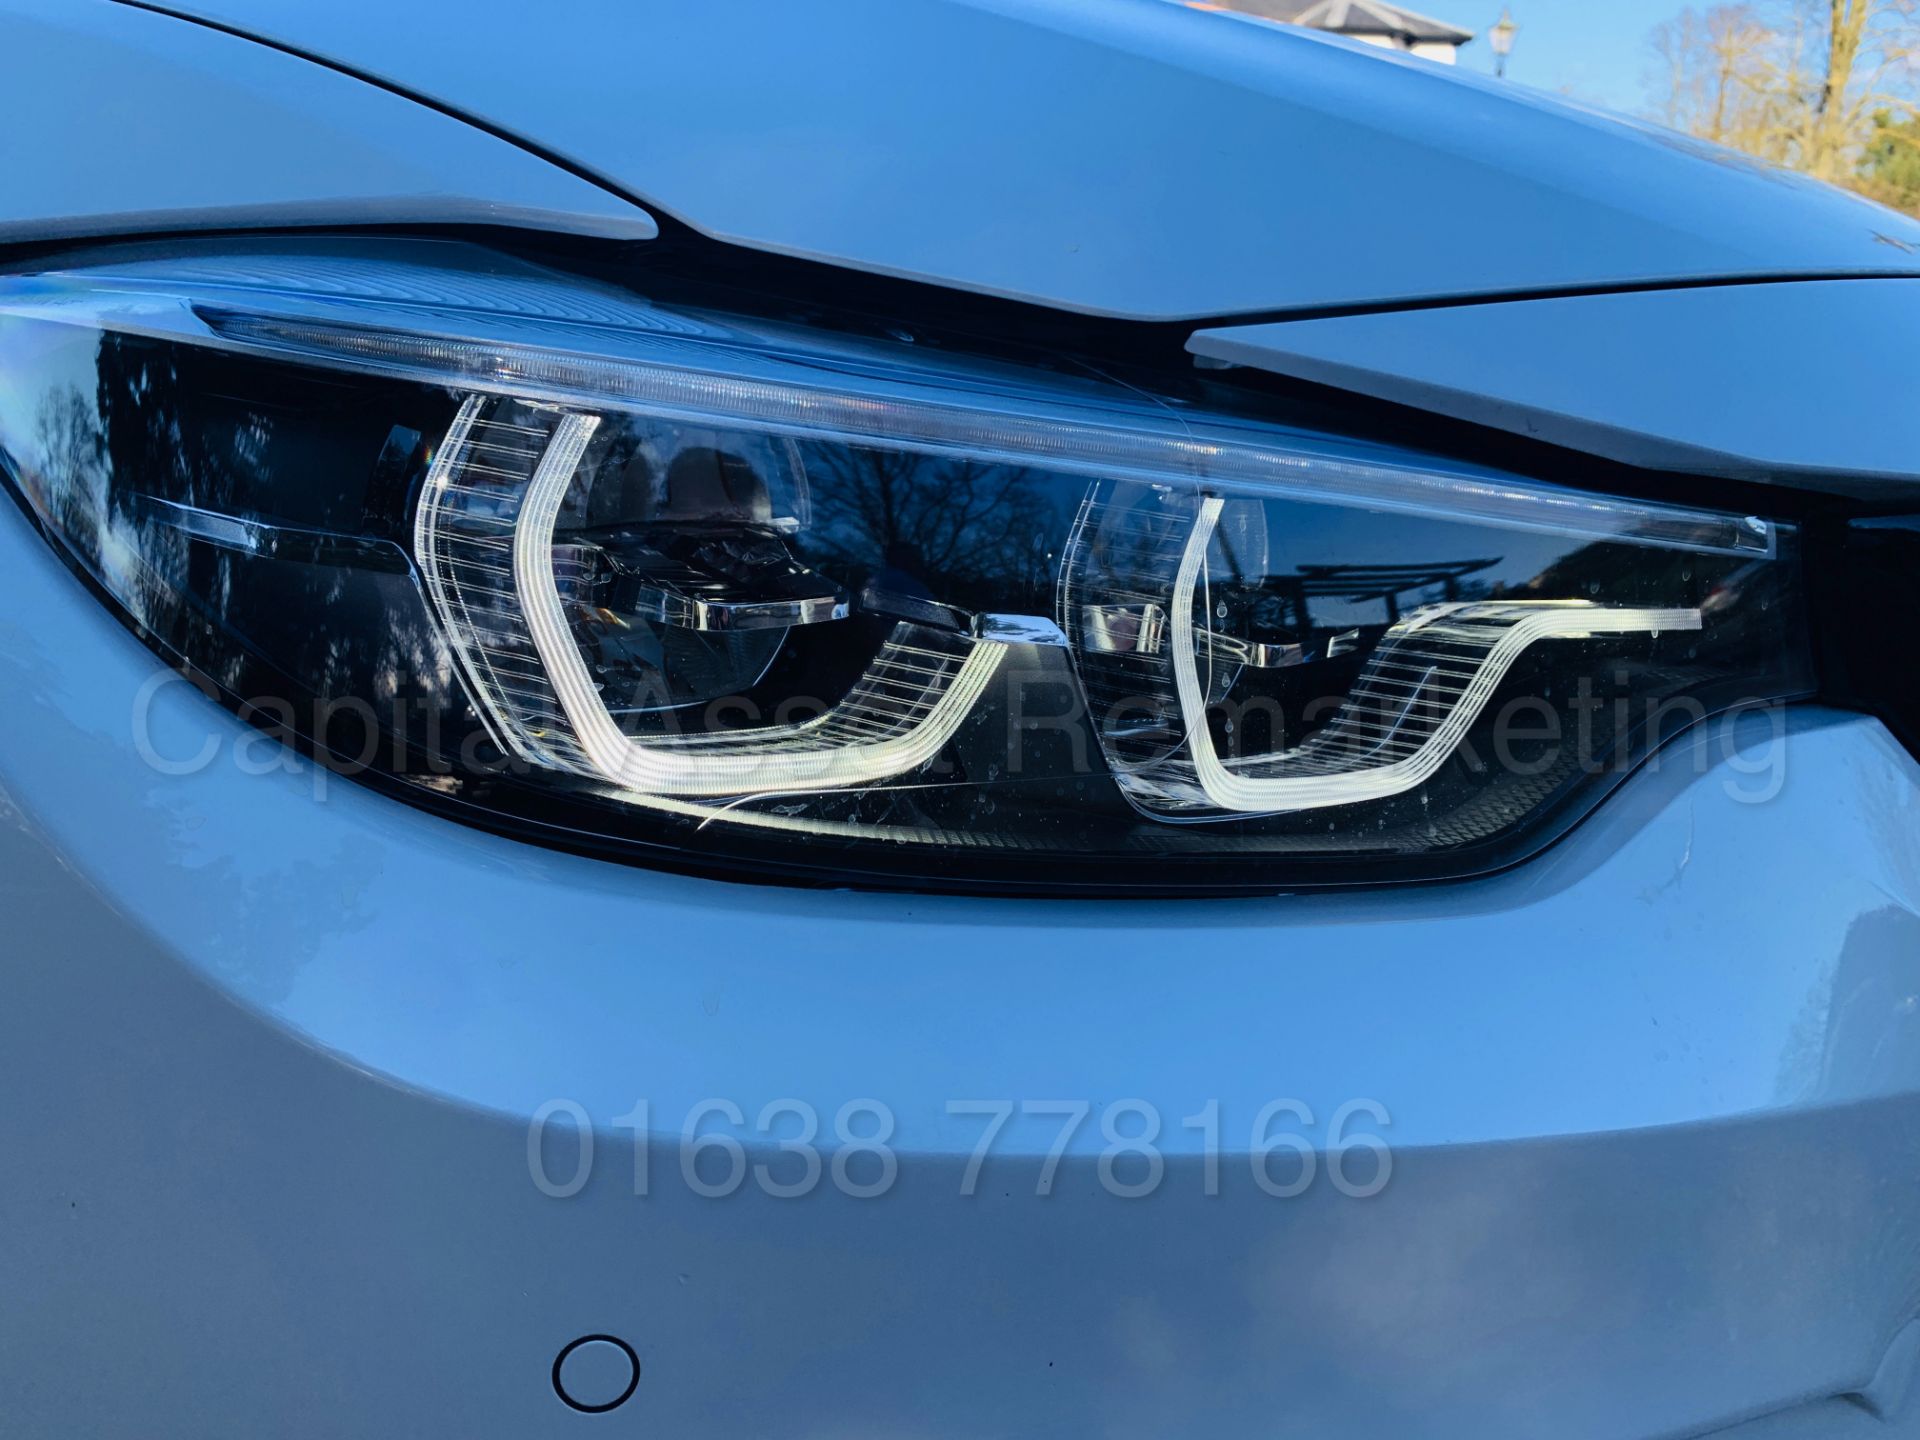 ON SALE BMW M4 CONVERTIBLE *COMPETITION PACKAGE* (2018 MODEL) '431 BHP - M DCT AUTO' WOW!!!!! - Image 26 of 89